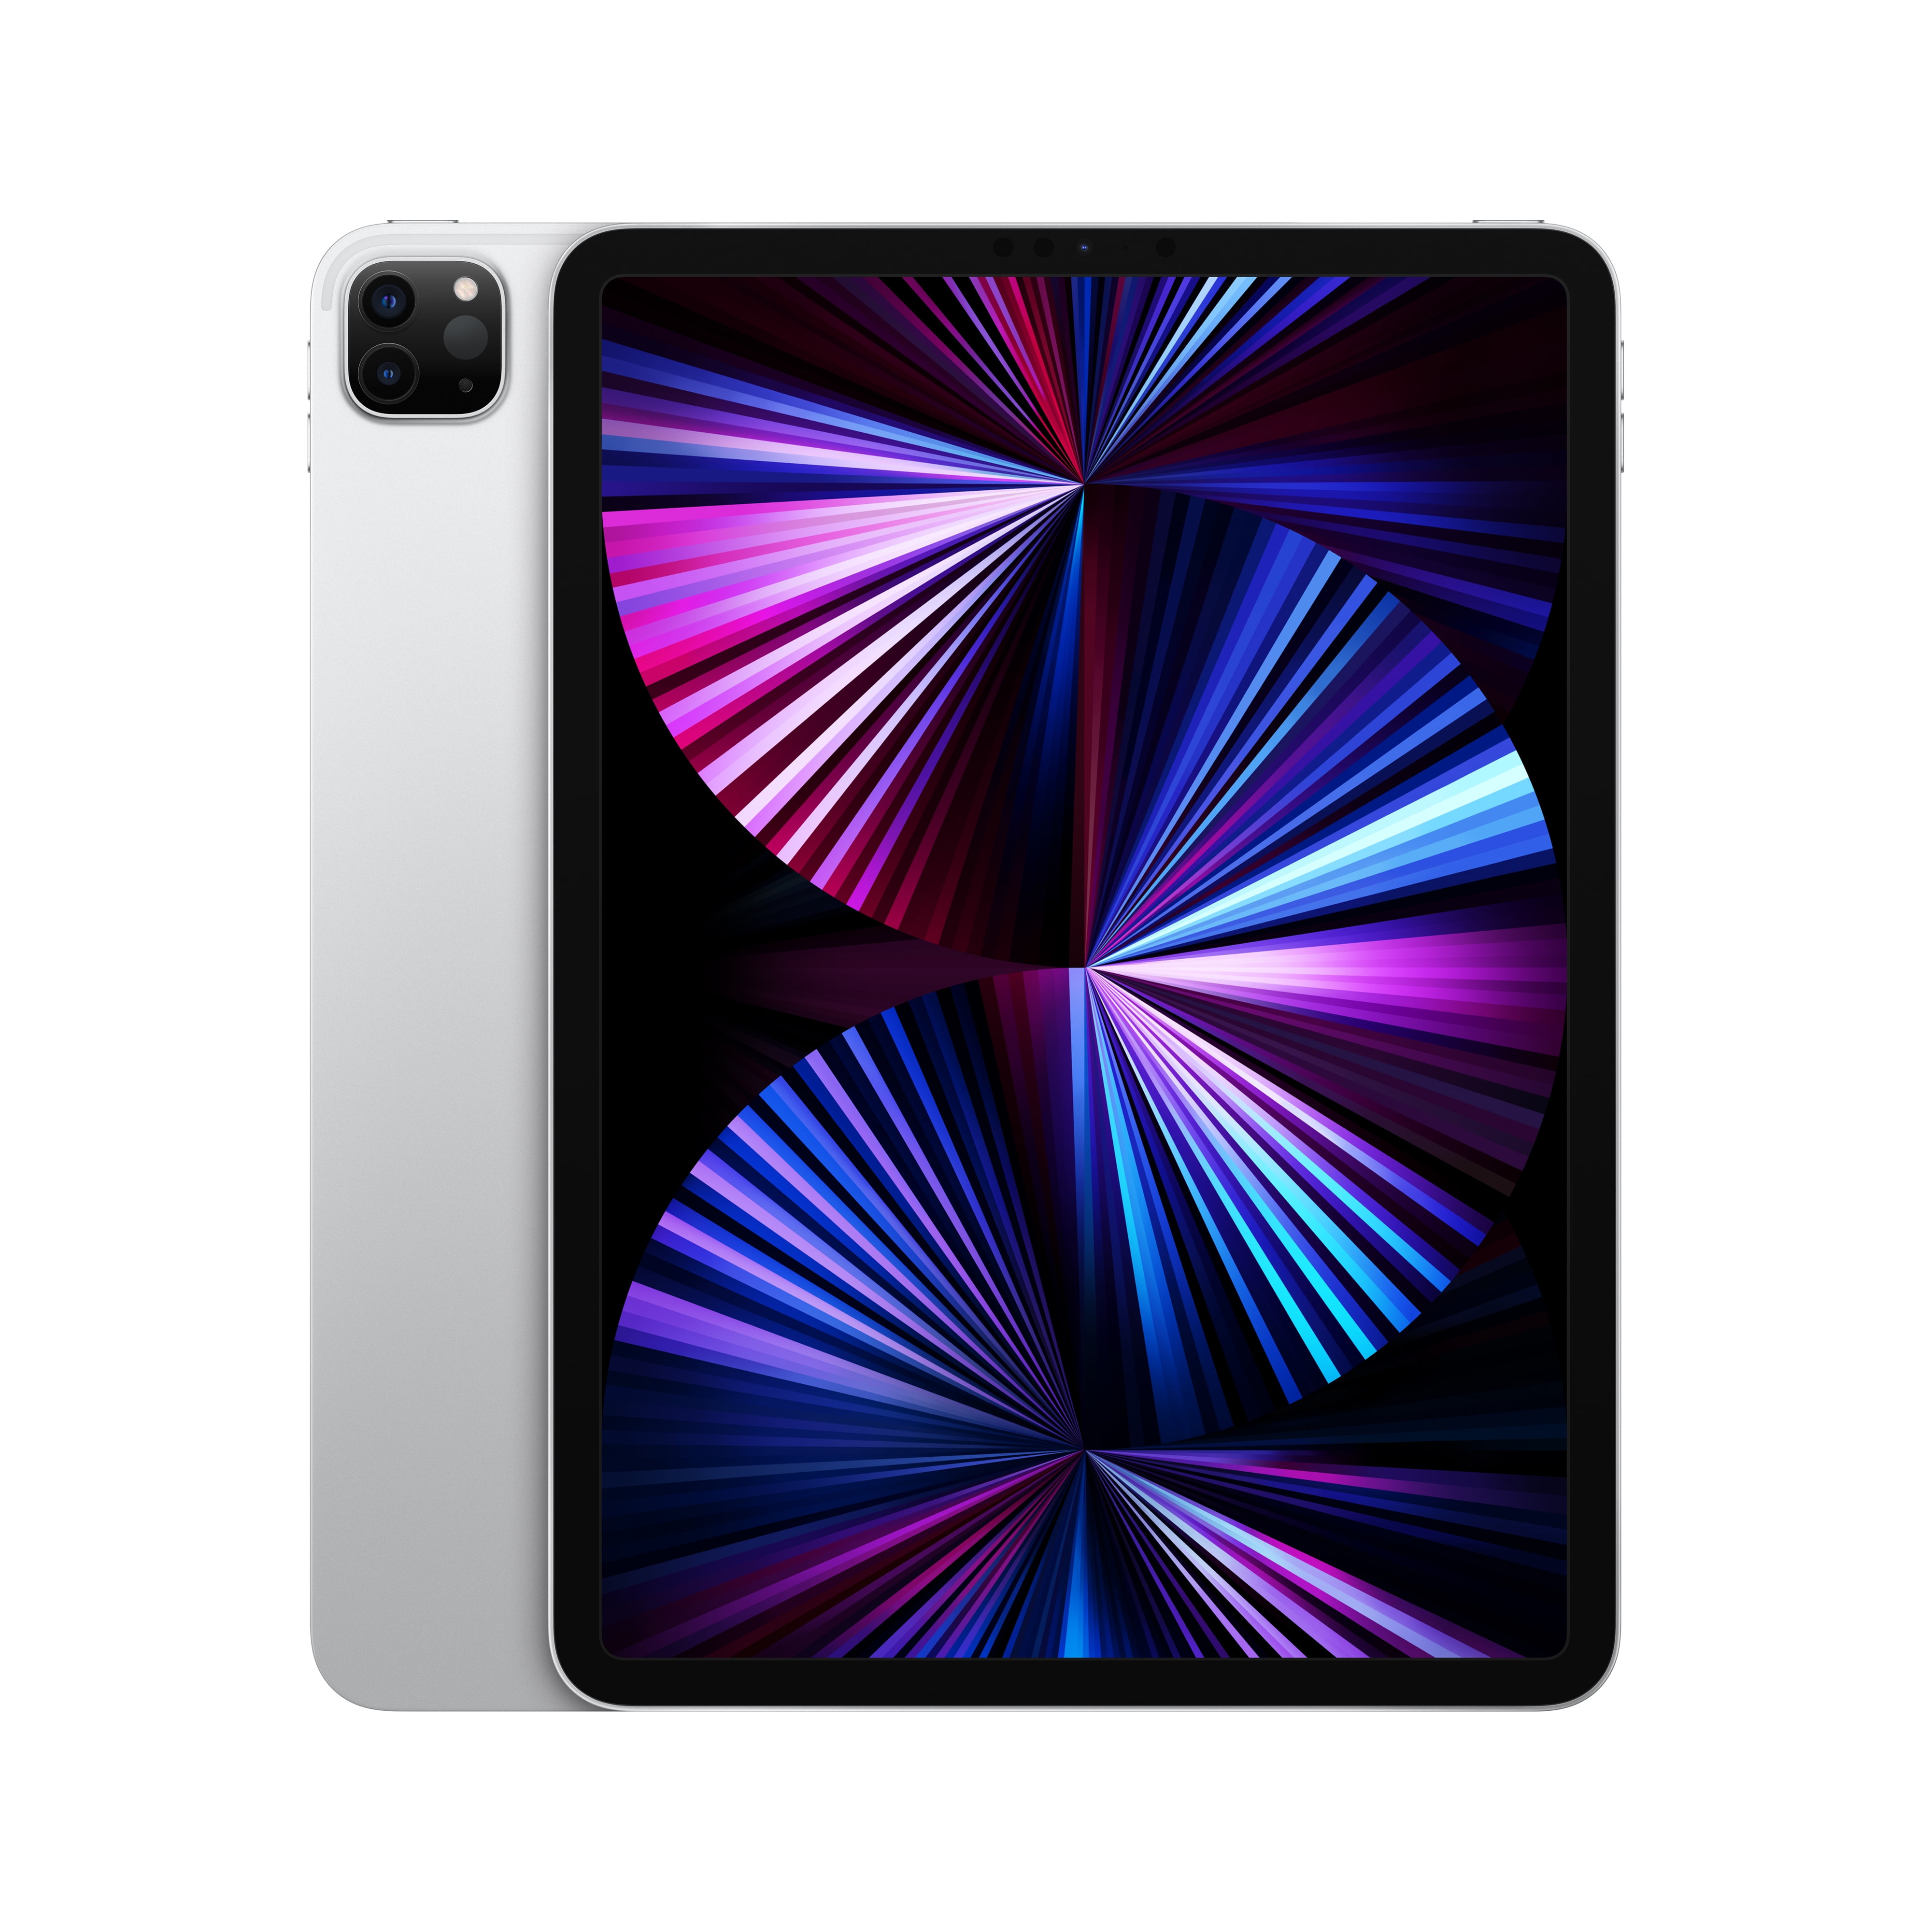 128GB Silver Apple Ipad Pro, Screen Size: 11 Inches at Rs 81900 in